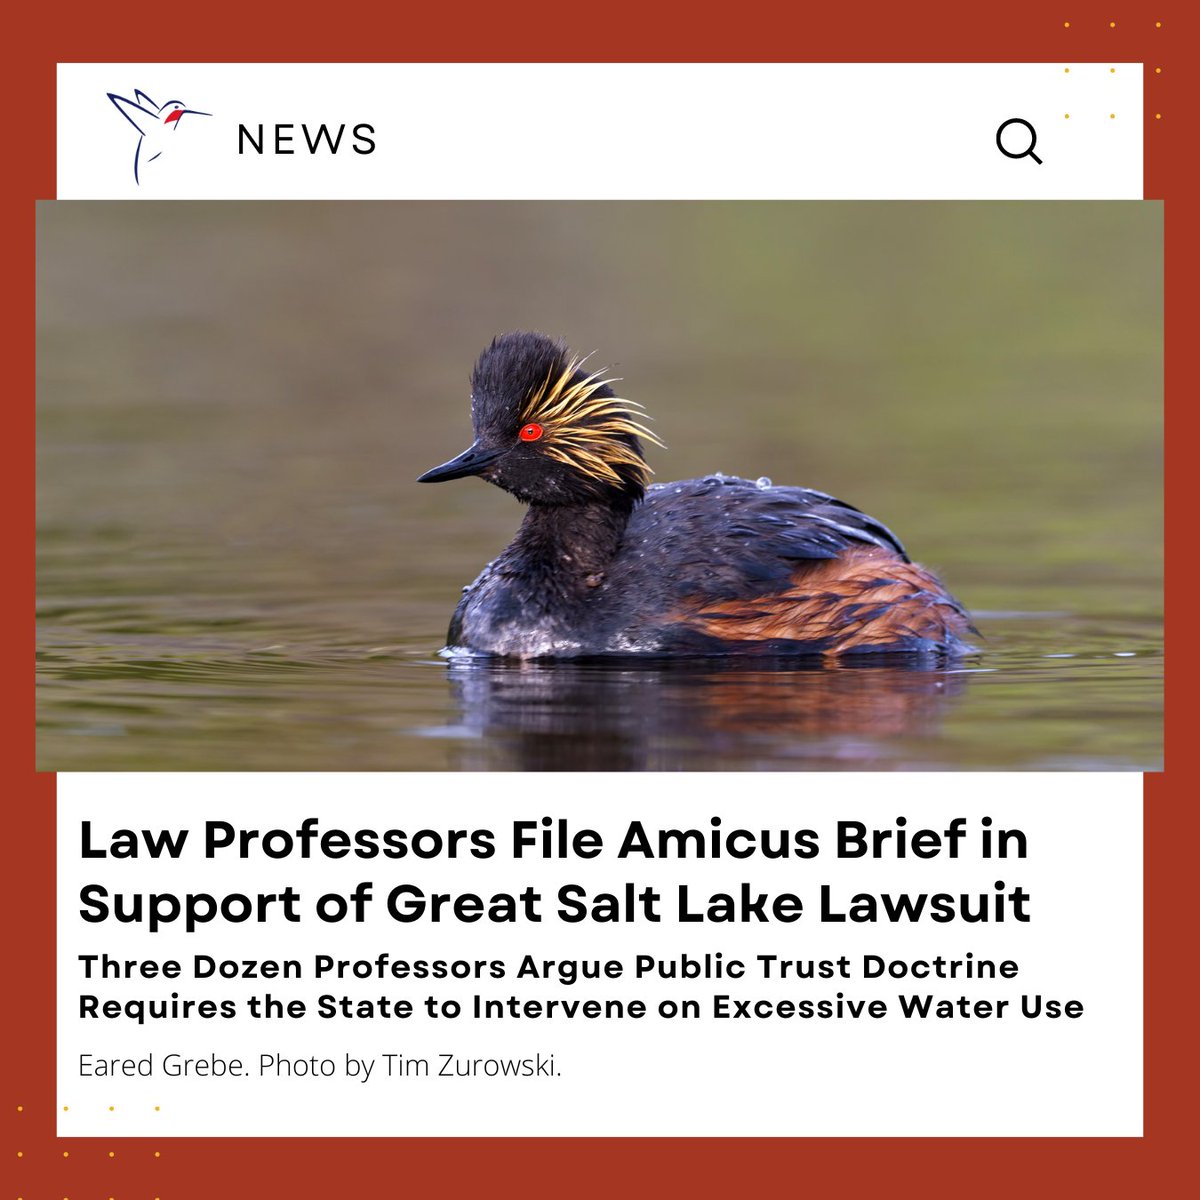 'The Great Salt Lake is irreplaceable for the millions of saline-dependent birds that need it for survival,' said Michael J. Parr, ABC President. 'The state has a responsibility to preserve the Great Salt Lake while we still have the chance.' bit.ly/4dlfA34 #SaltLake